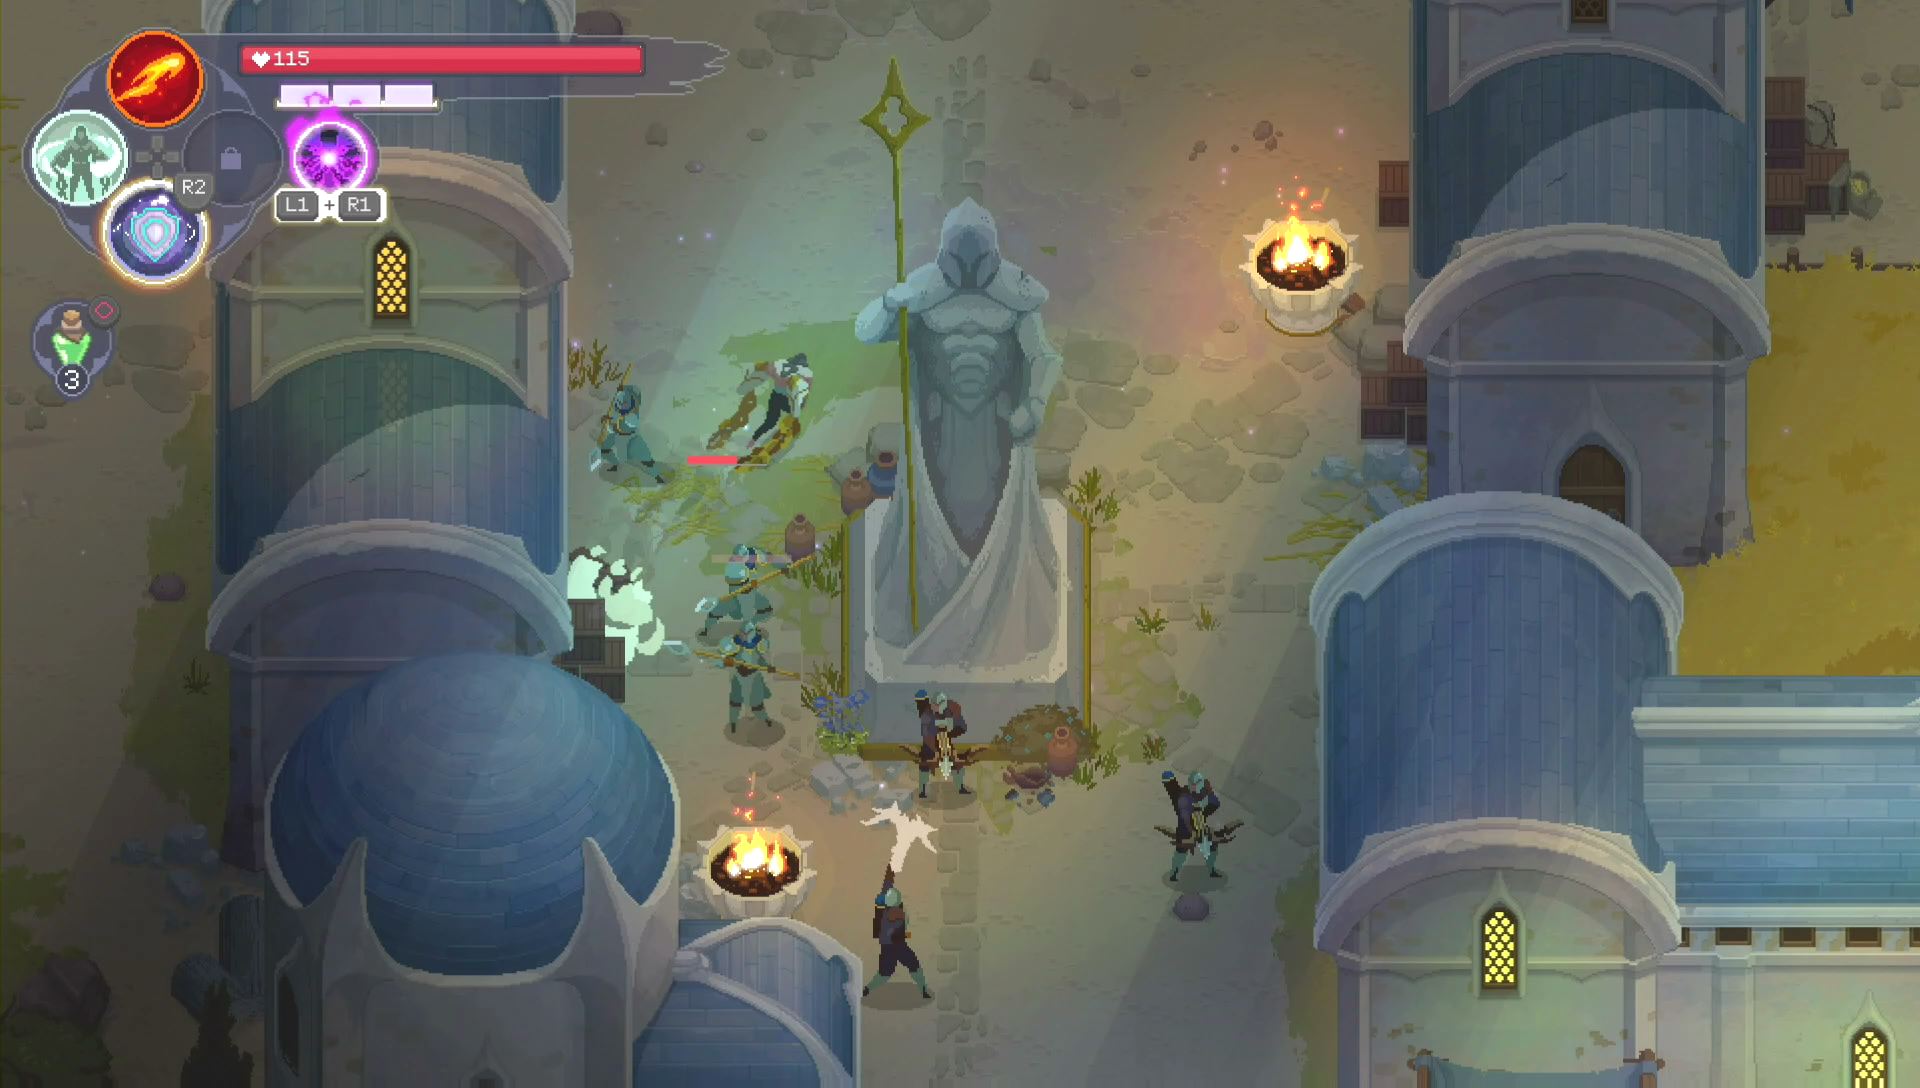 The mageseeker A League of Legends Story Review - Game Introductions -  eTail EU Blog